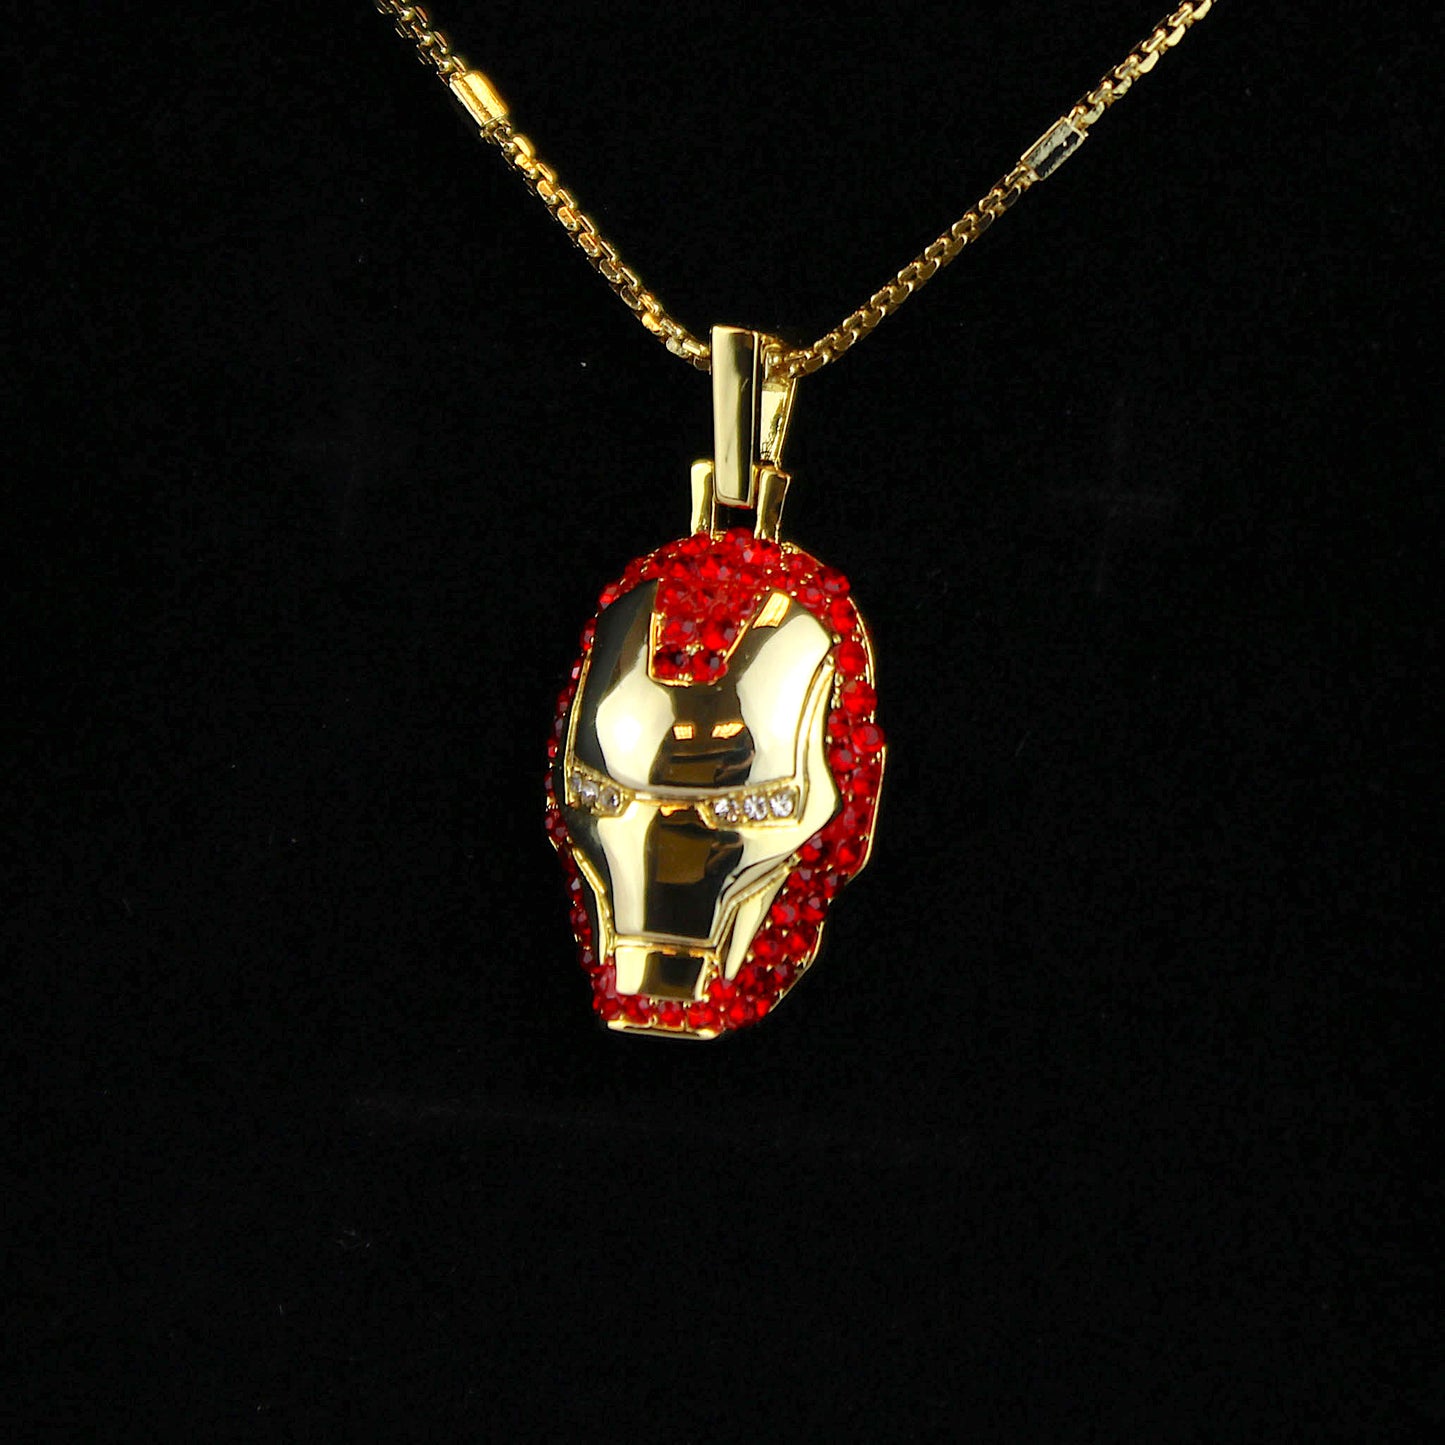 Iron Man (Marvel) Gold Plated Crystal Necklace